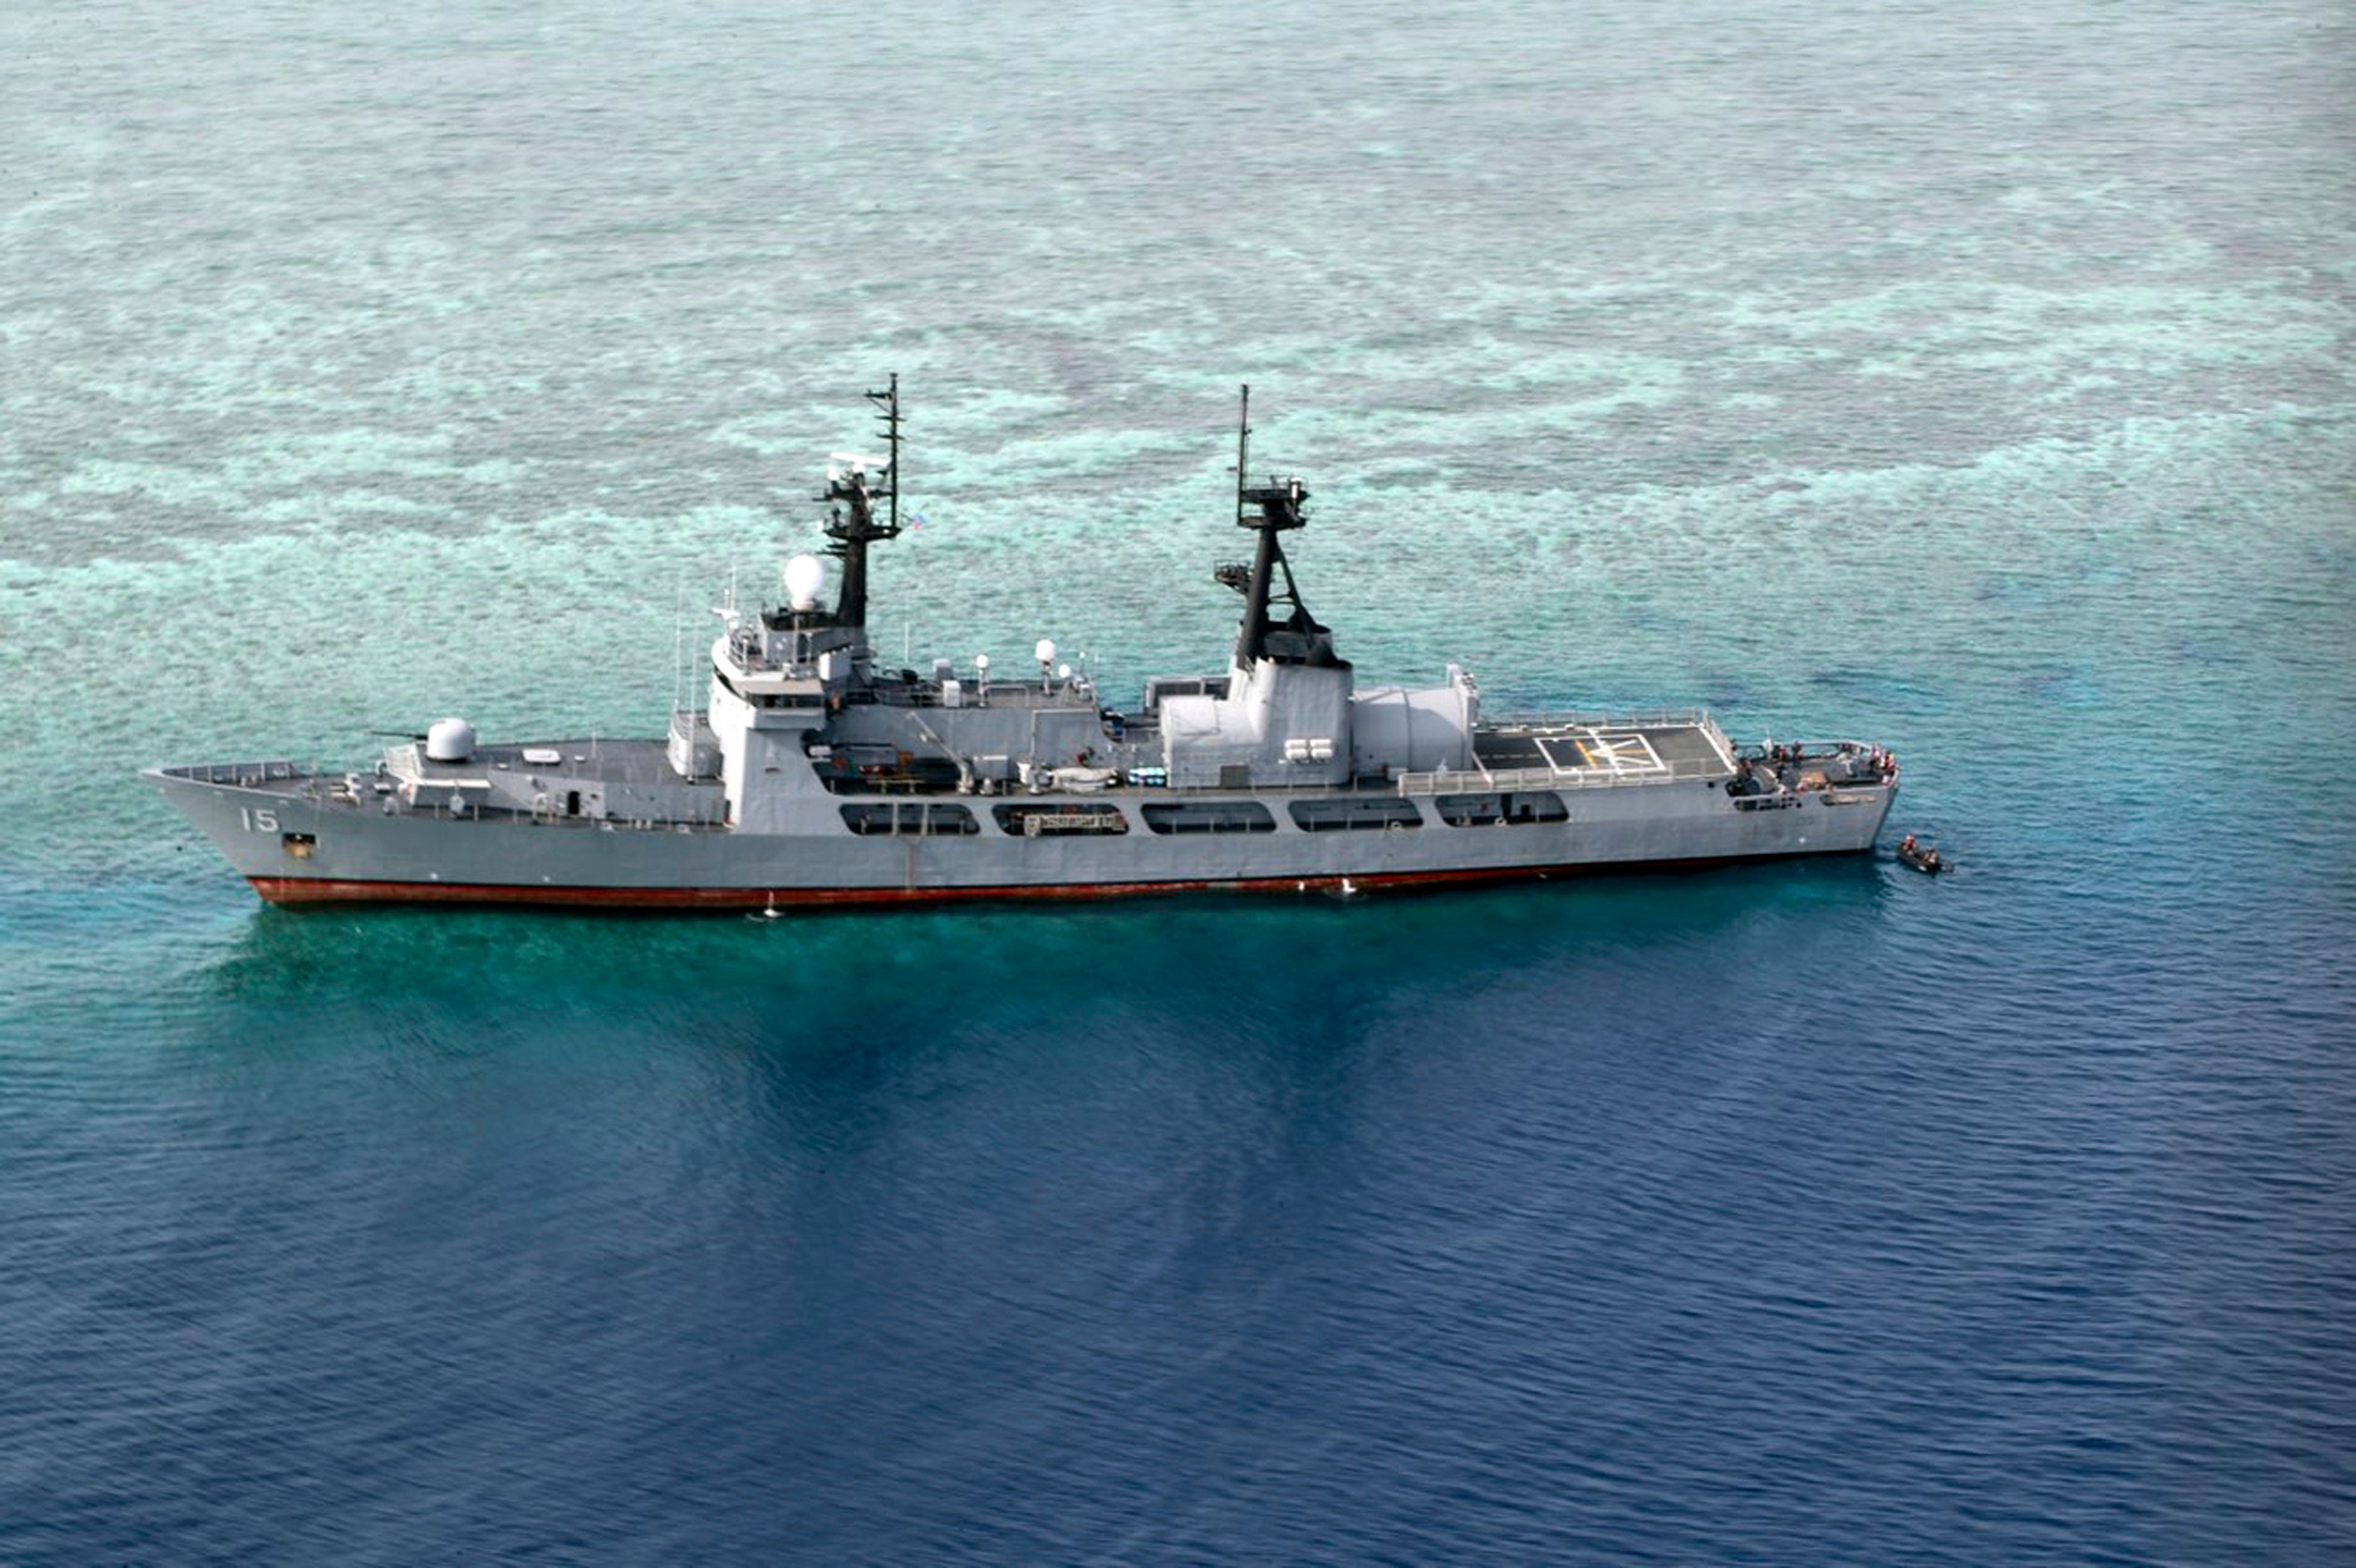 The BRP Gregorio del Pilar is one of two Philippine warships that will take part in joint drills with the US, Australia and Japan in the South China Sea on Sunday. Photo: Armed Forces of the Philippines via AP